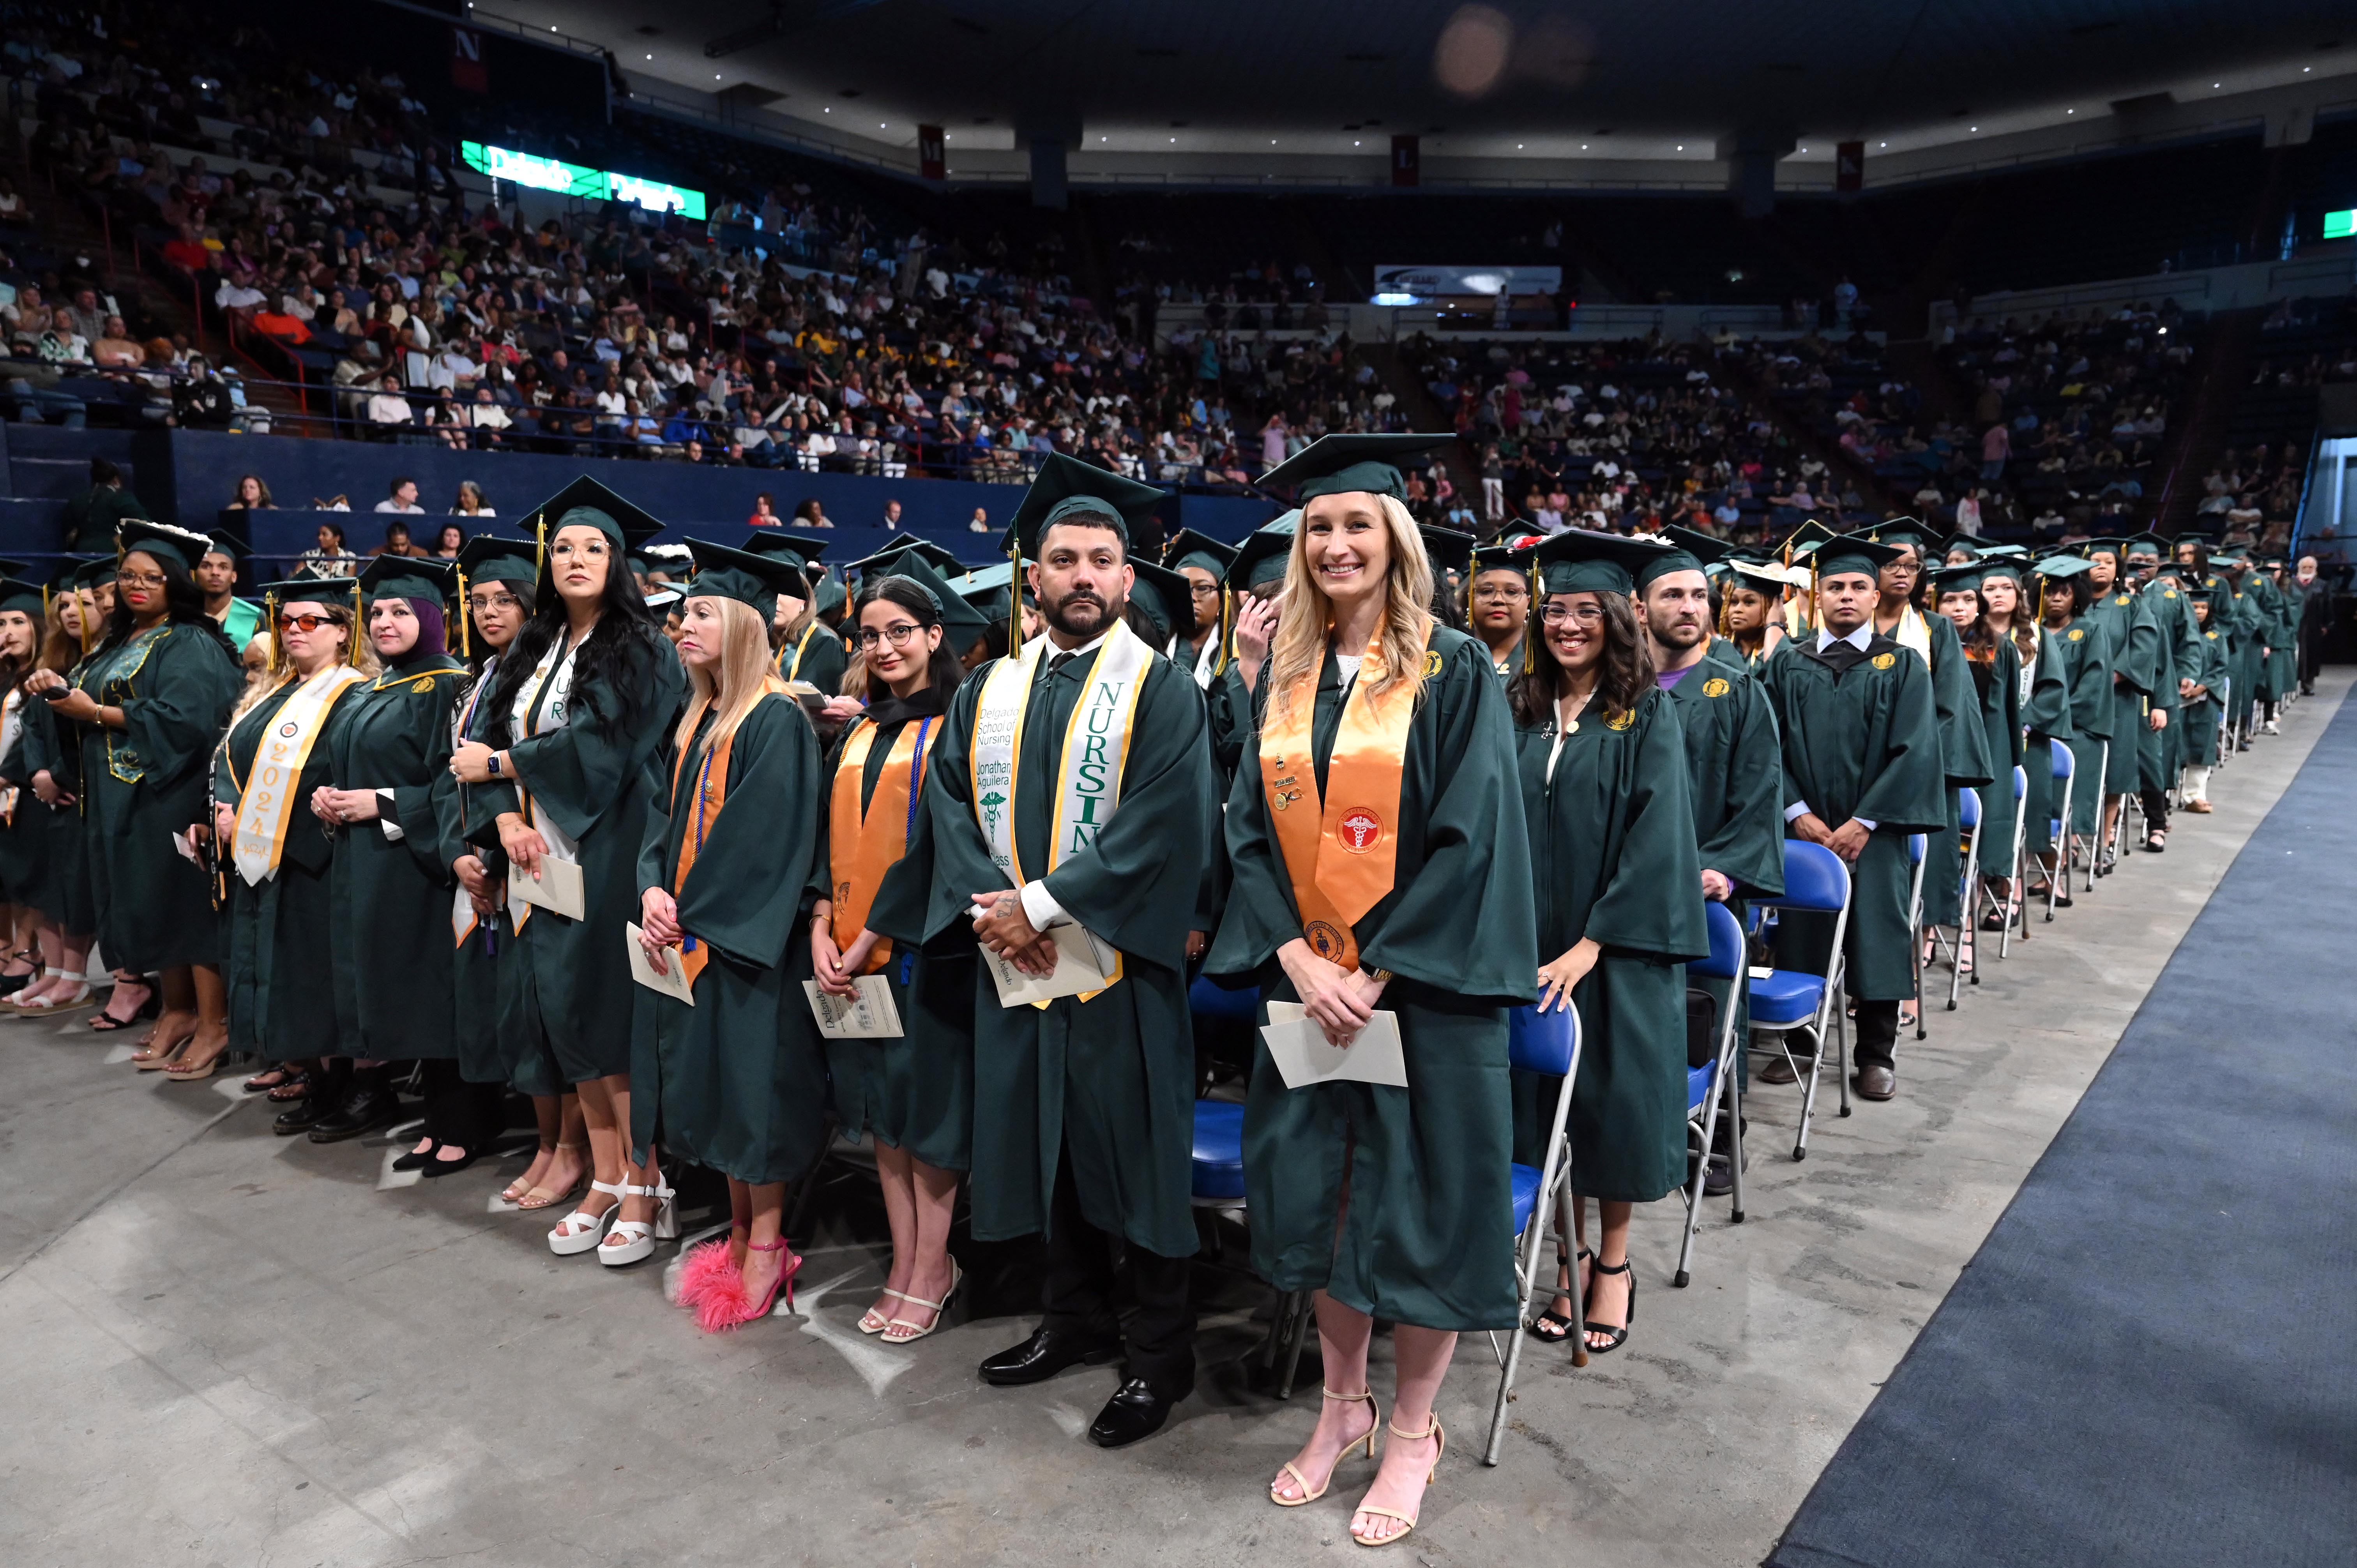 Graduates standing at their seats